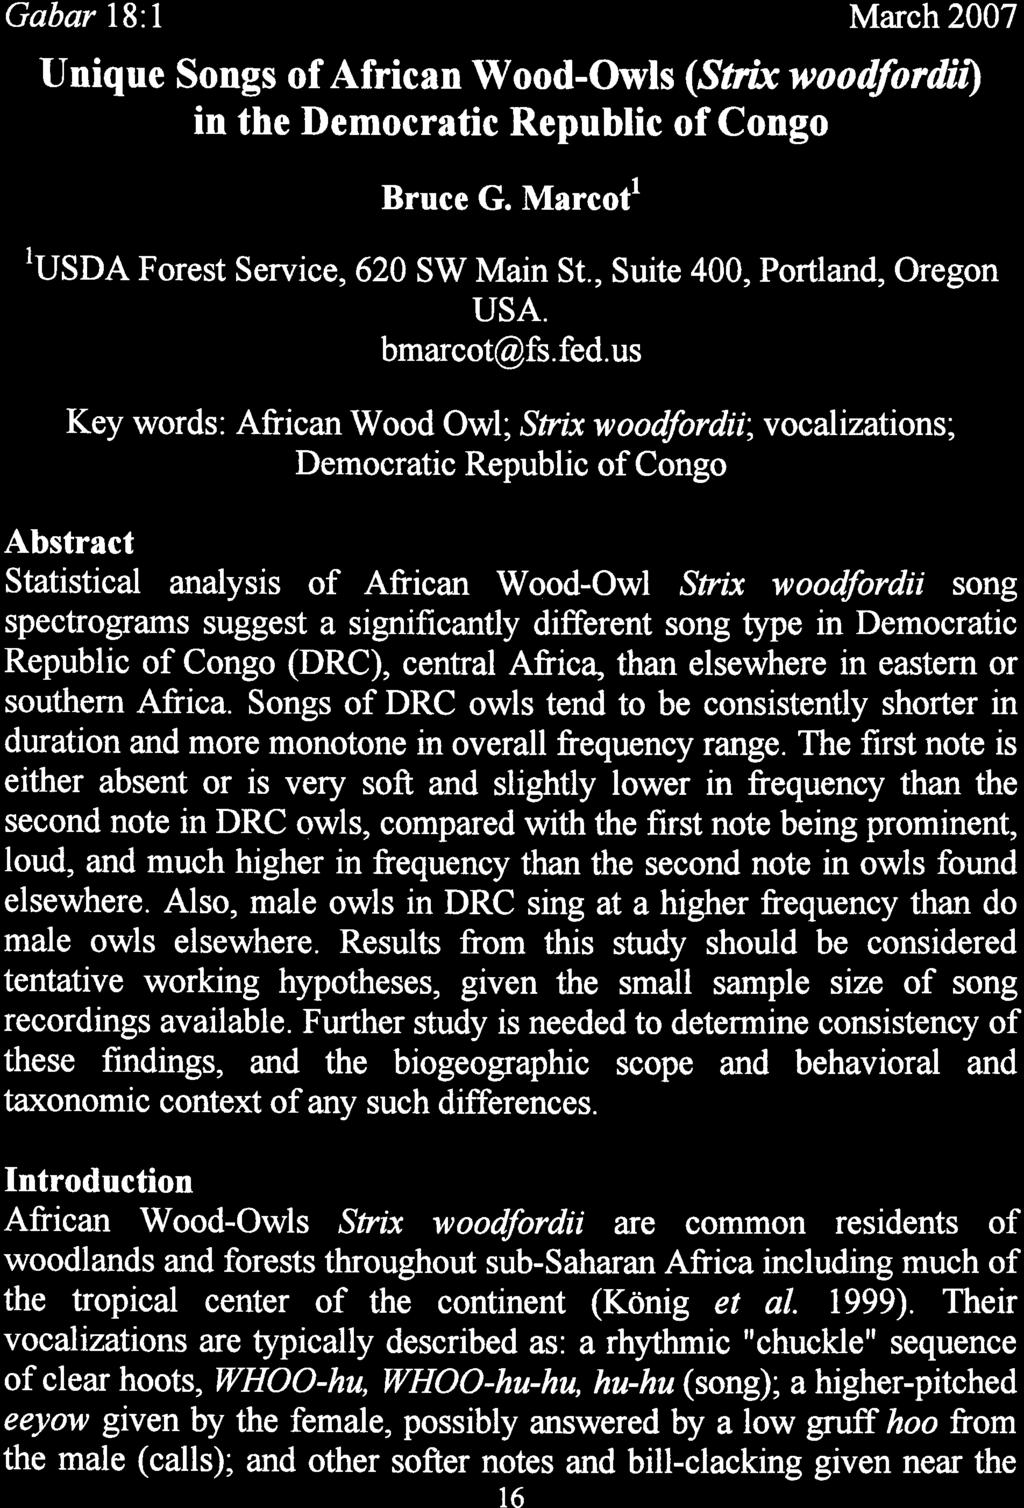 Unique Songs of African Wood-Owls (St& woodfordii) in the Democratic Republic of Congo Bruce G. ~arcot' 1 USDA Forest Service, 62 SW Main St., Suite 4, Portland, Oregon USA. bmarcot@fs. fed.